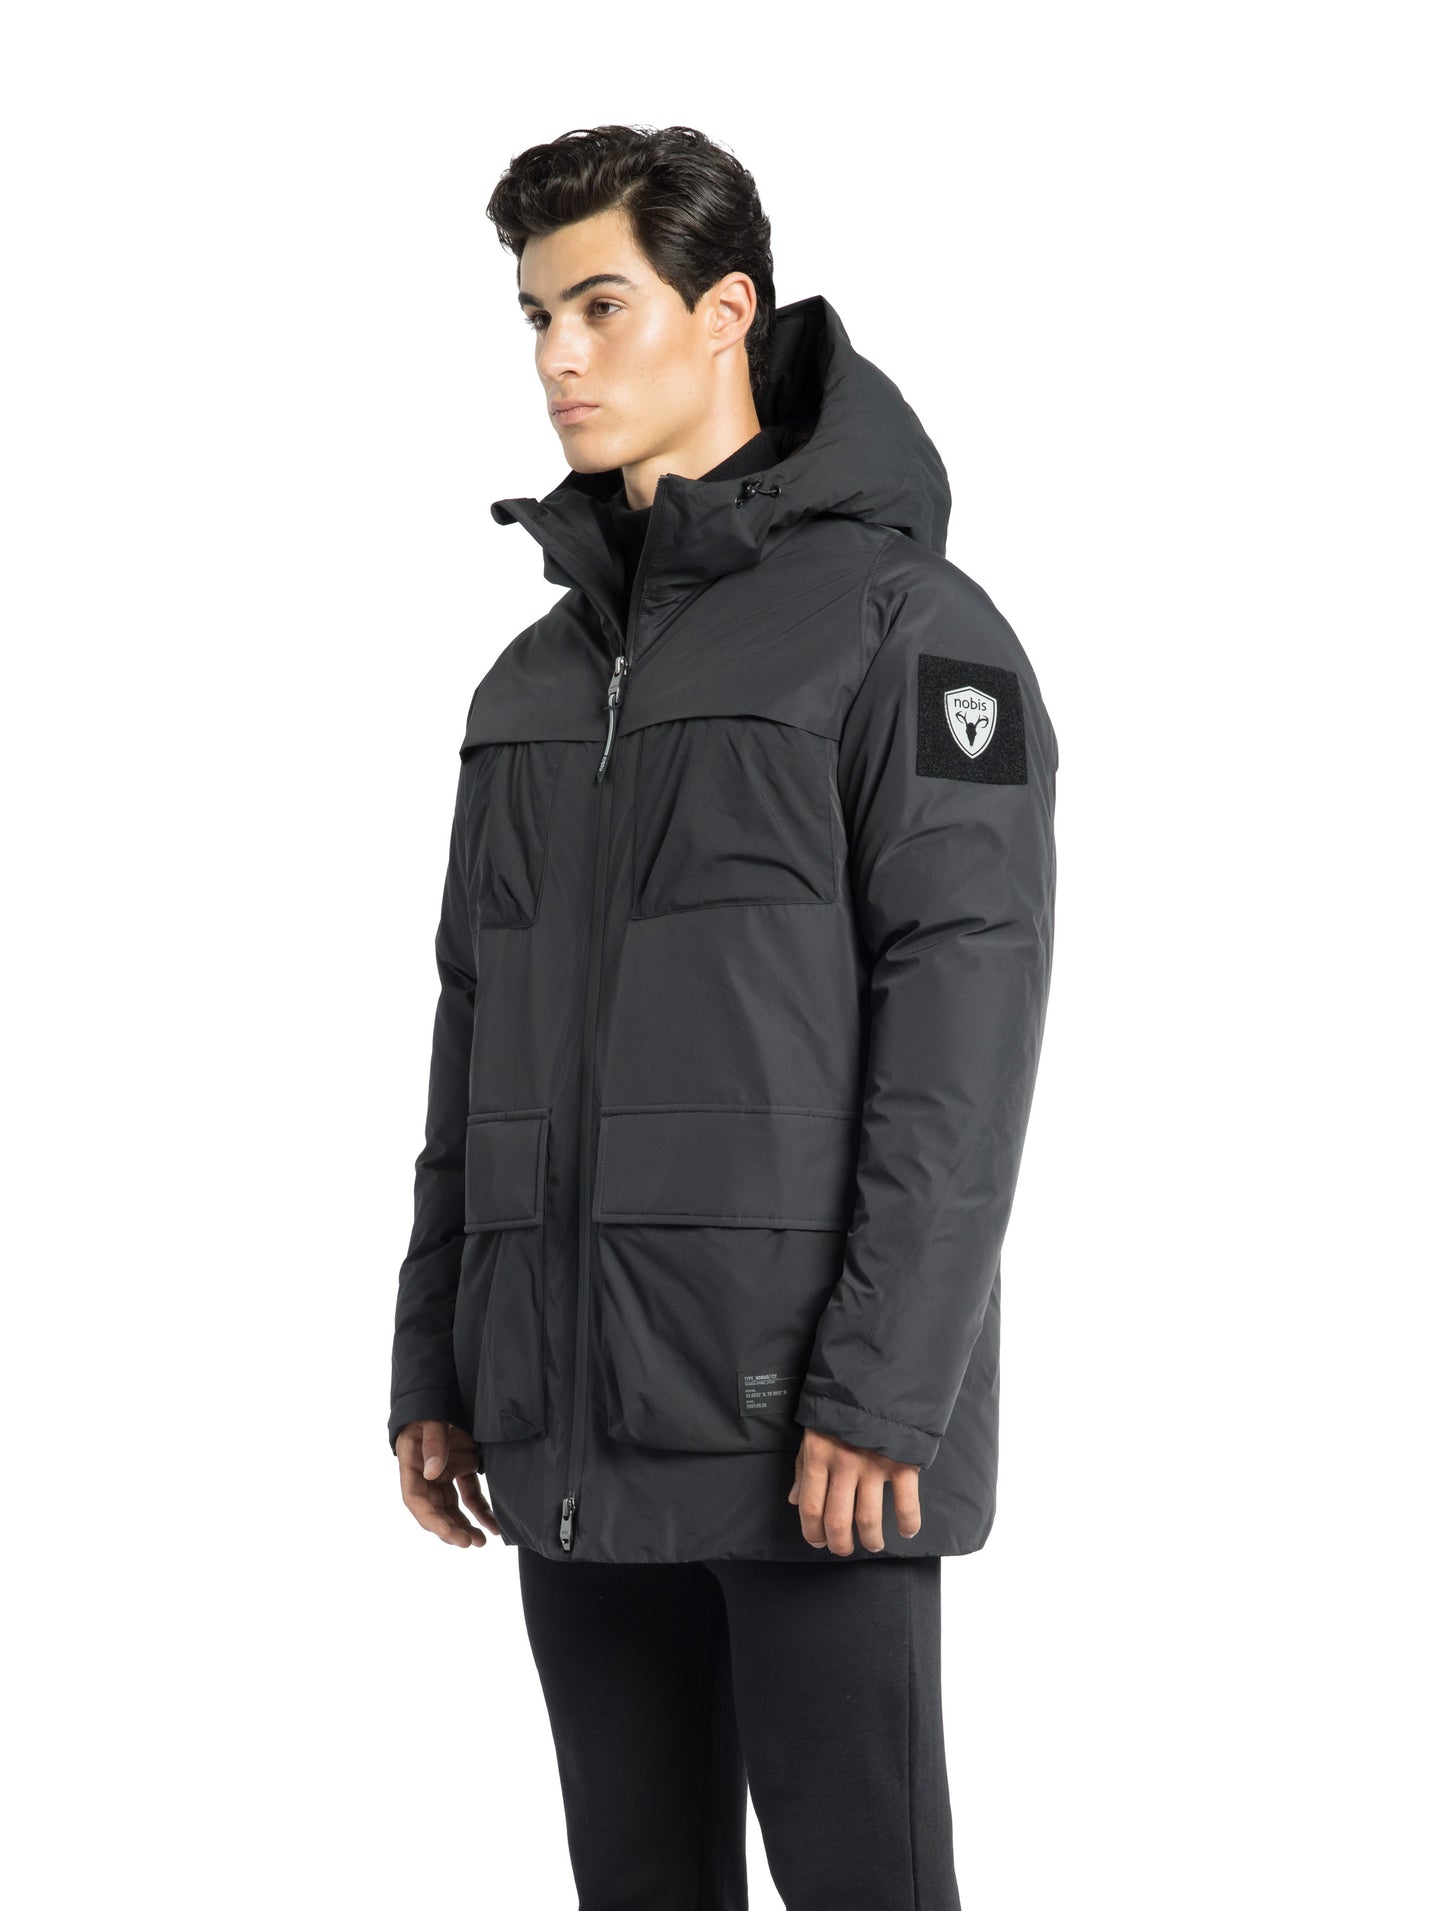 Ronin Men's Performance Utility Jacket in thigh length, premium 3-ply micro denier and stretch ripstop fabrication, Premium Canadian origin White Duck Down insulation, non-removable down-filled hood, bellow chest pockets, magnetic closure waist flap pockets, two-way centre-front zipper, pit zipper vents, hidden adjustable waist drawcord, in Black